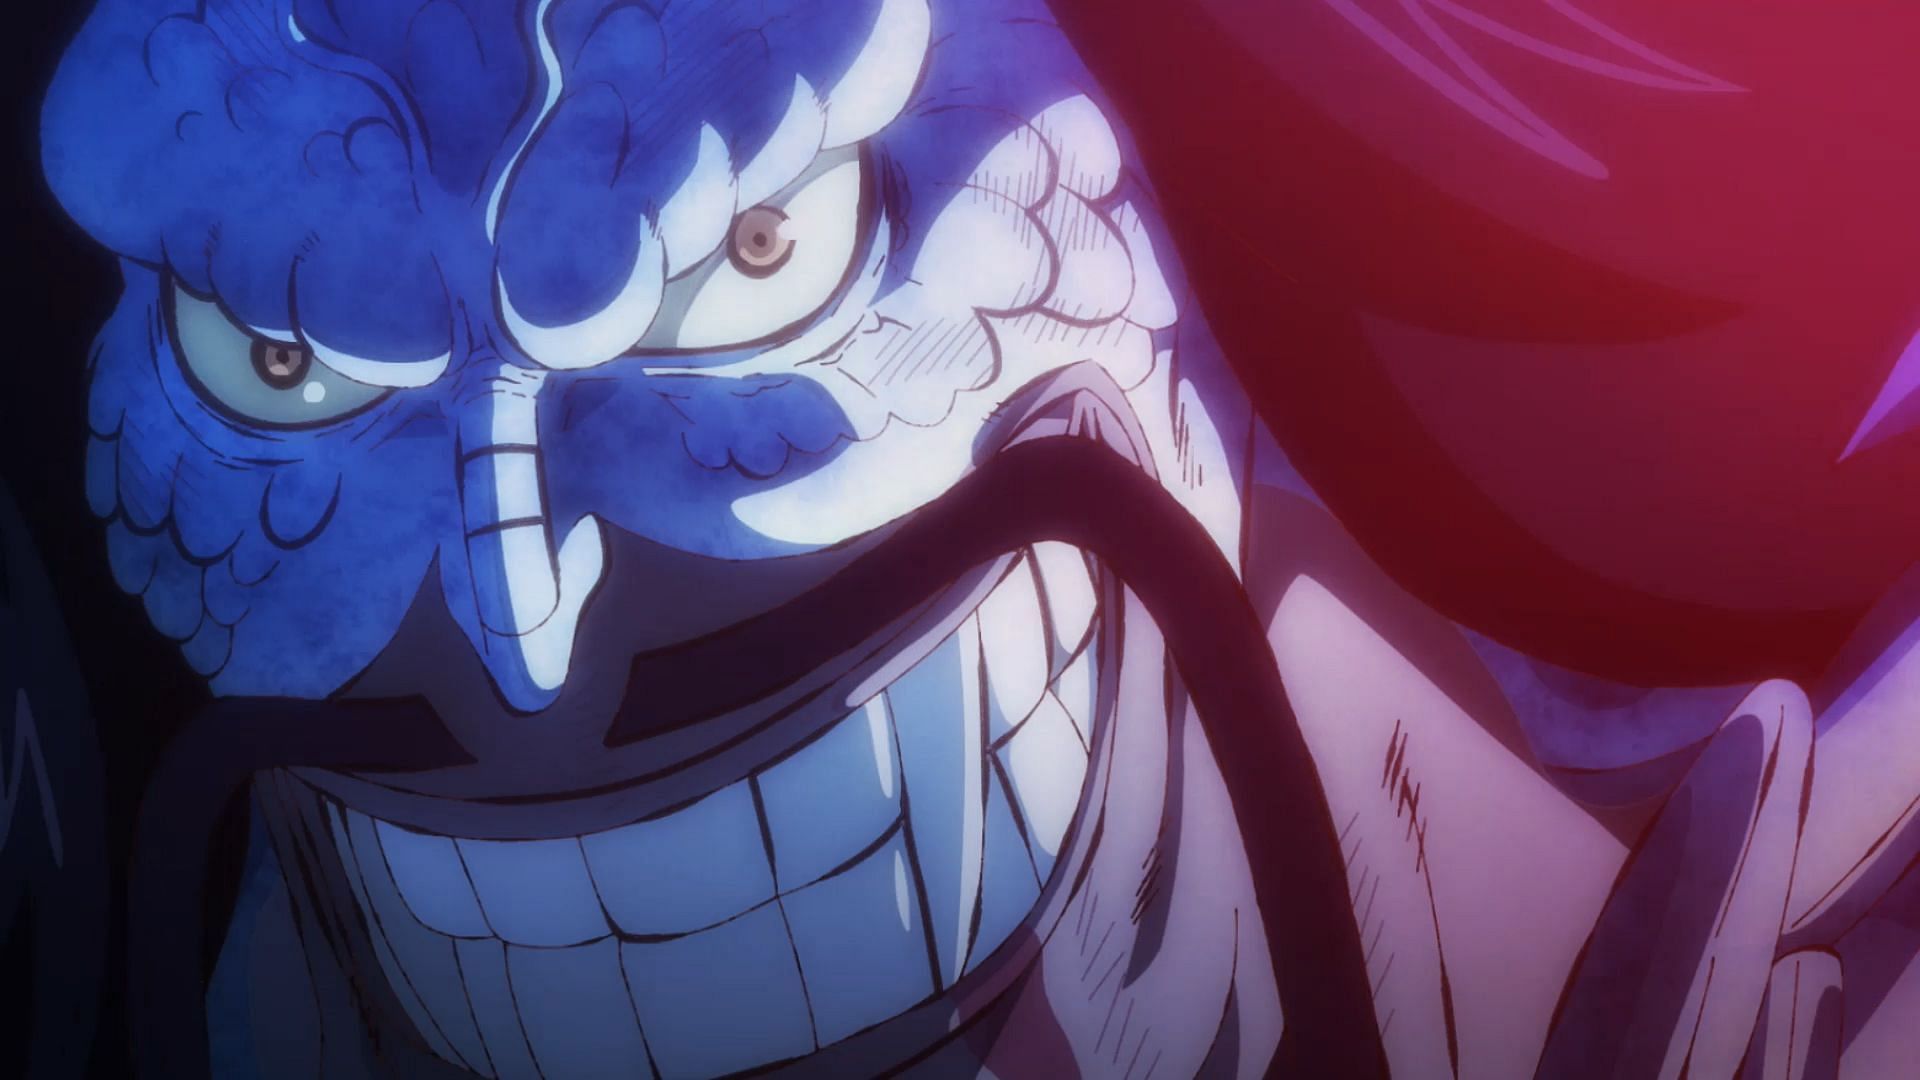 Kaido as seen in the show (Image via Toei Animation)